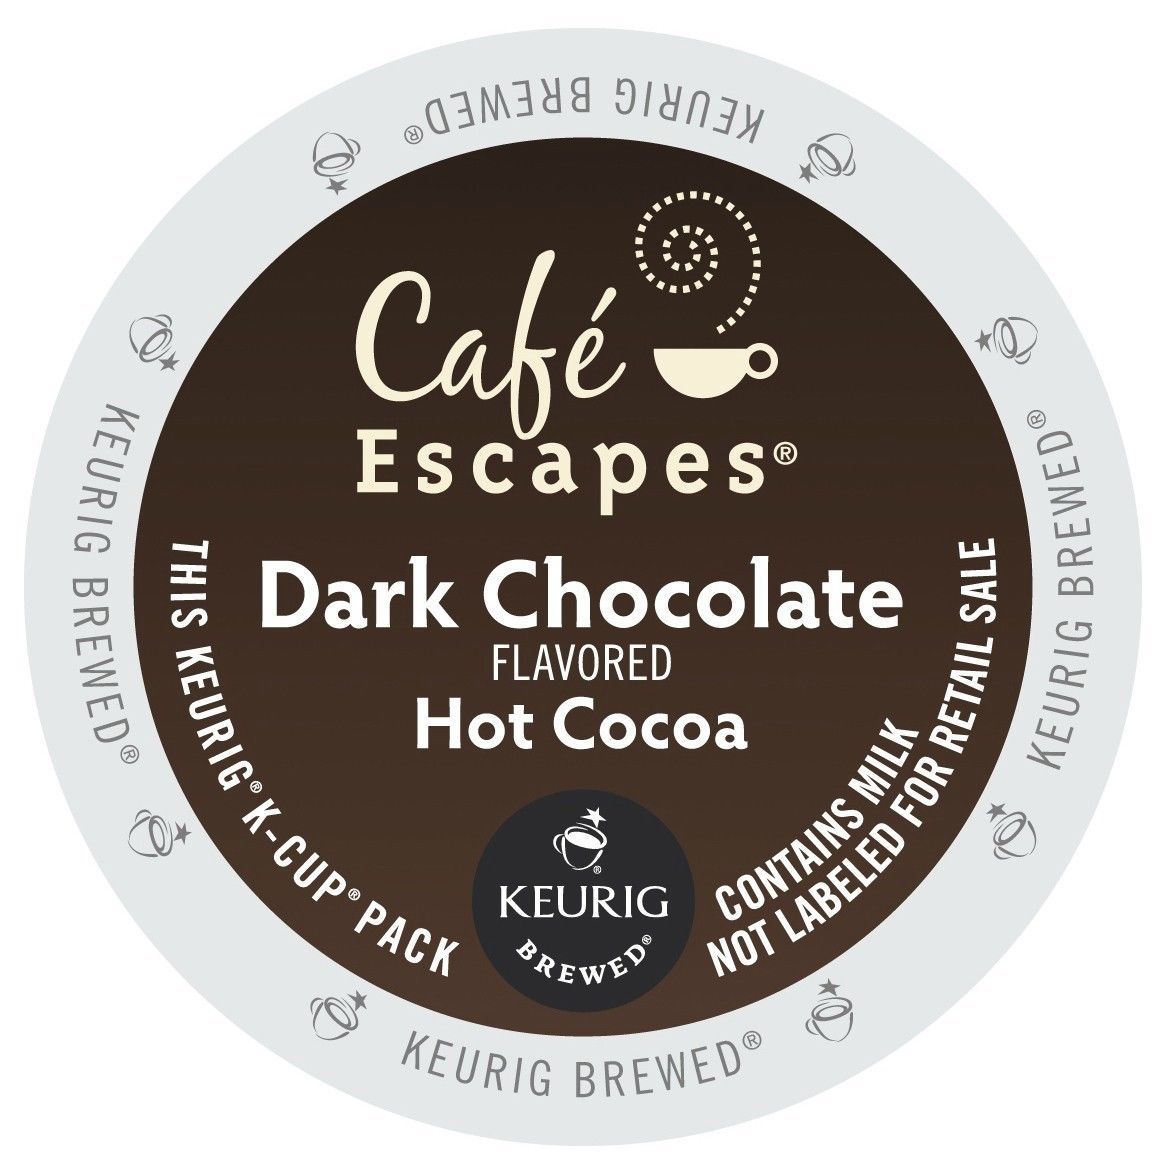 Cafe Escapes Dark Chocolate Hot Cocoa  24 to 144 K cups Pick Any Size FREE SHIP - $25.89 - $109.89